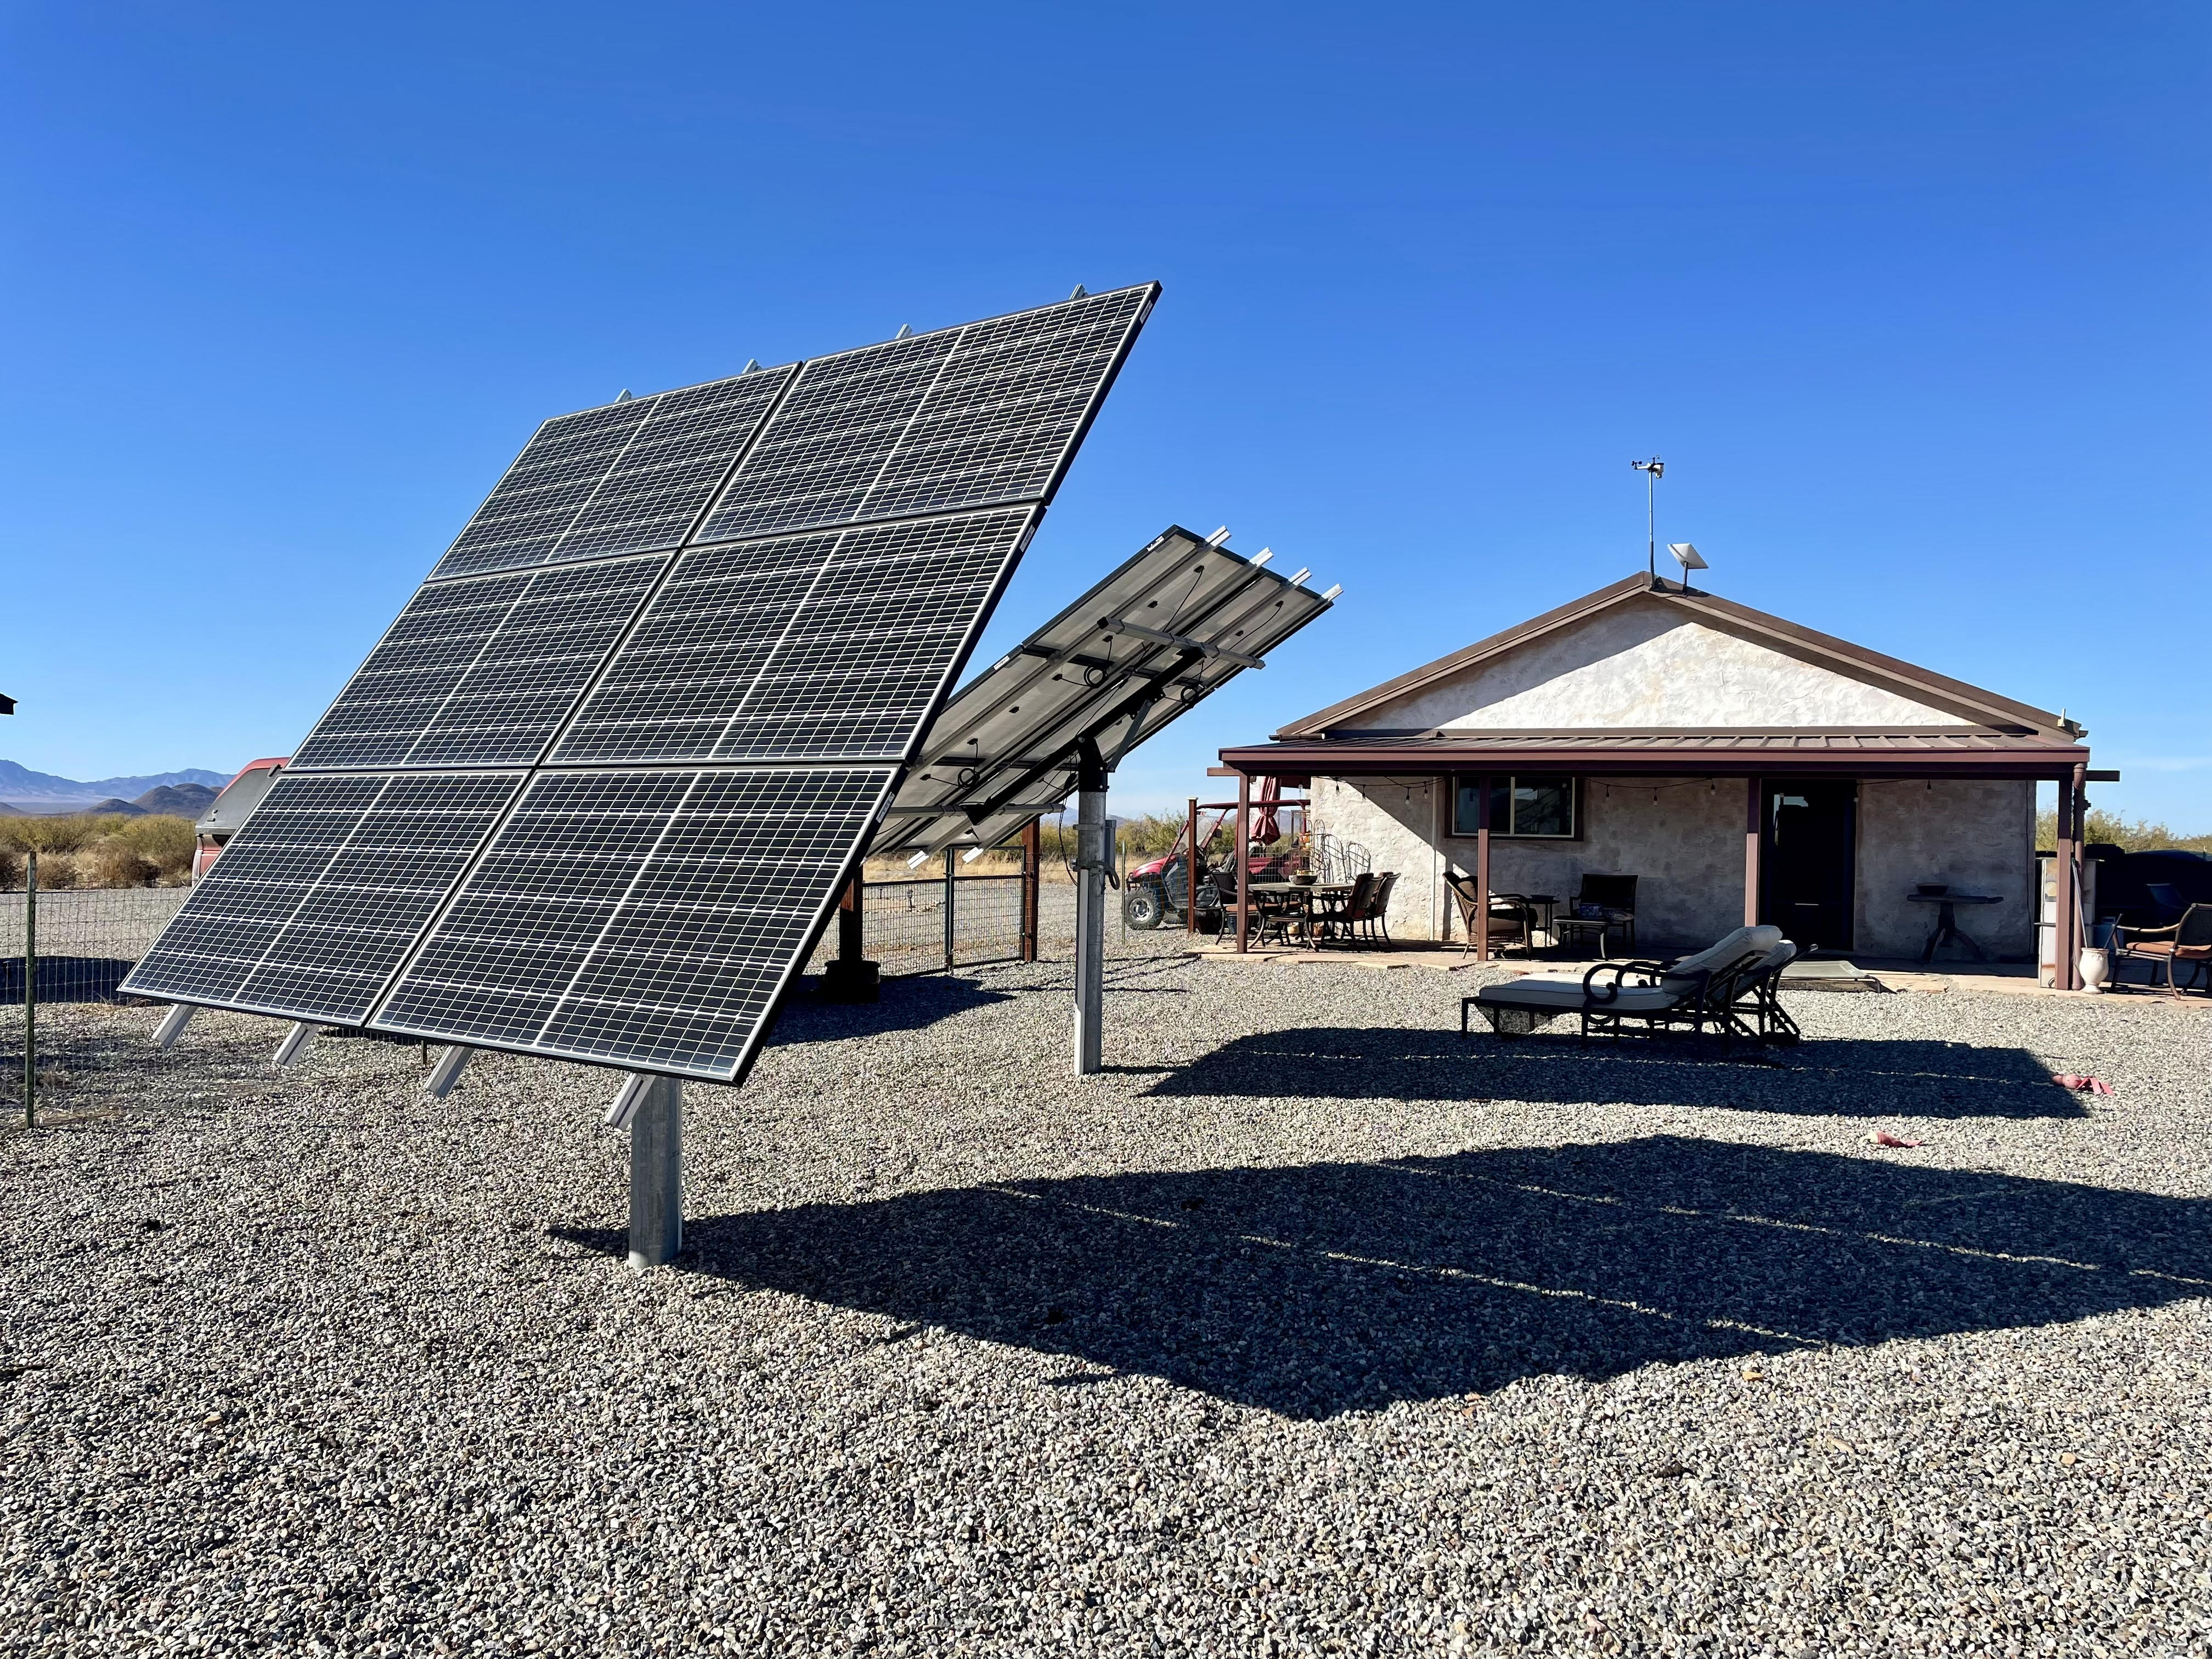 A photo of a one storey house in the desert with two large solar panels in the front yard.